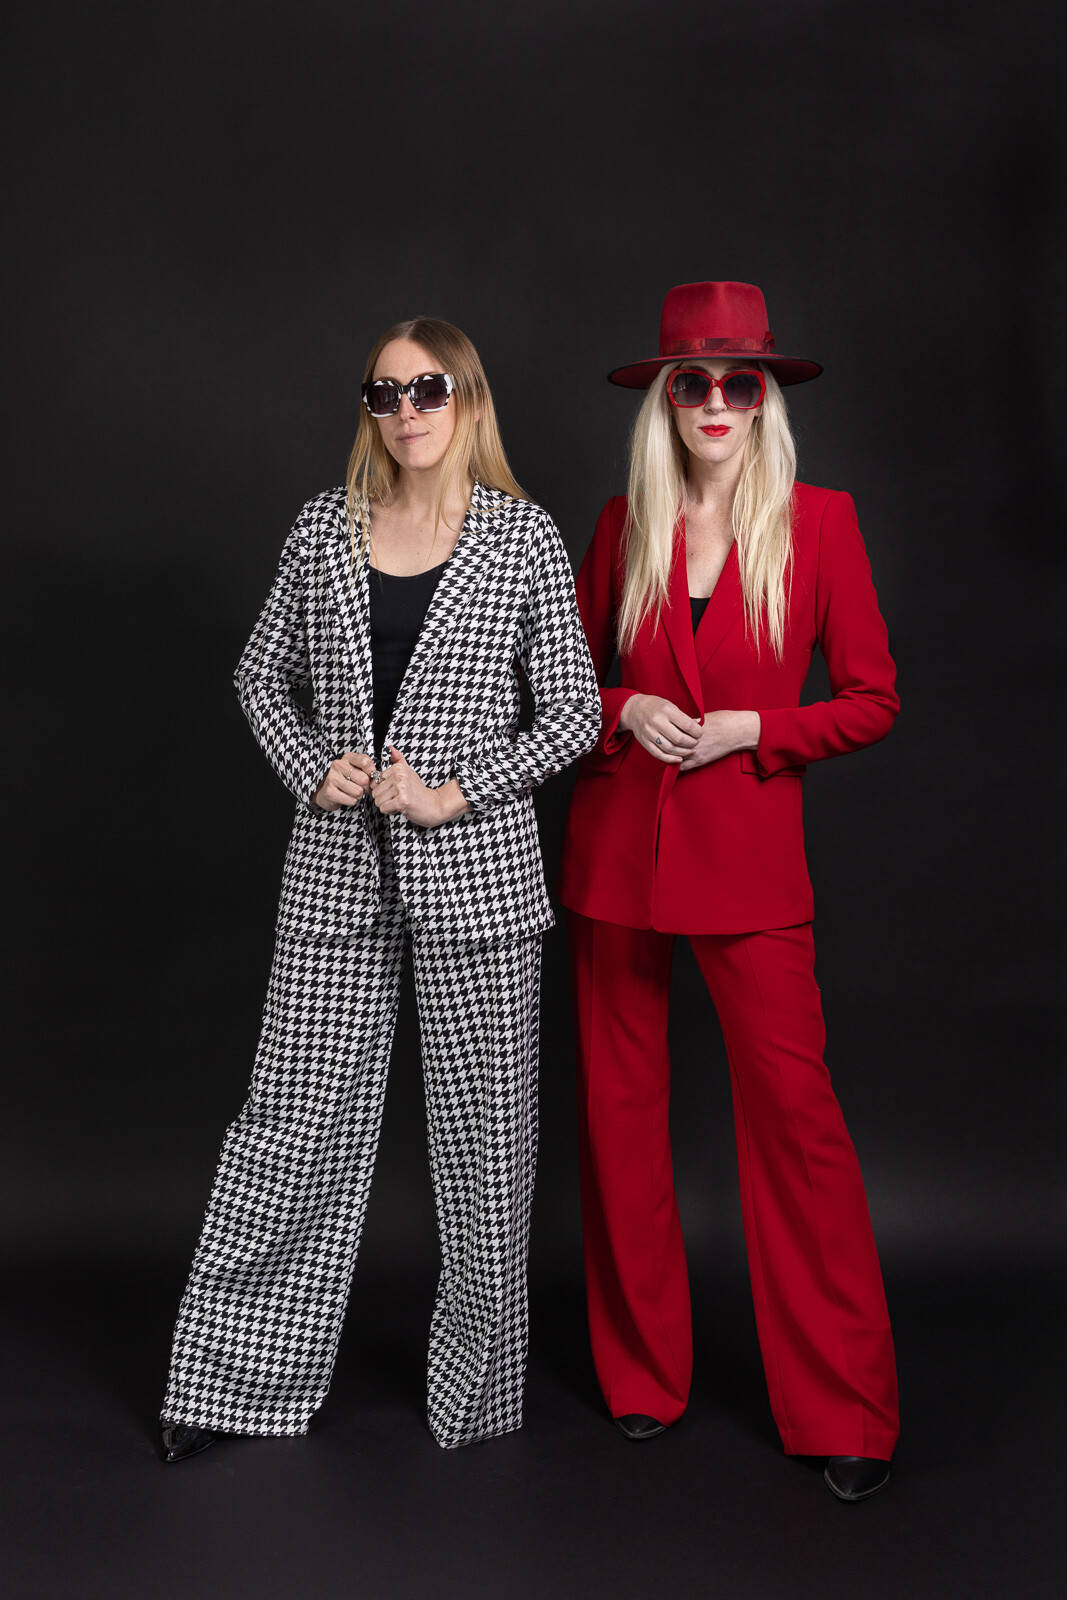 Two blond models pose against black studio background wearing read and black clothes